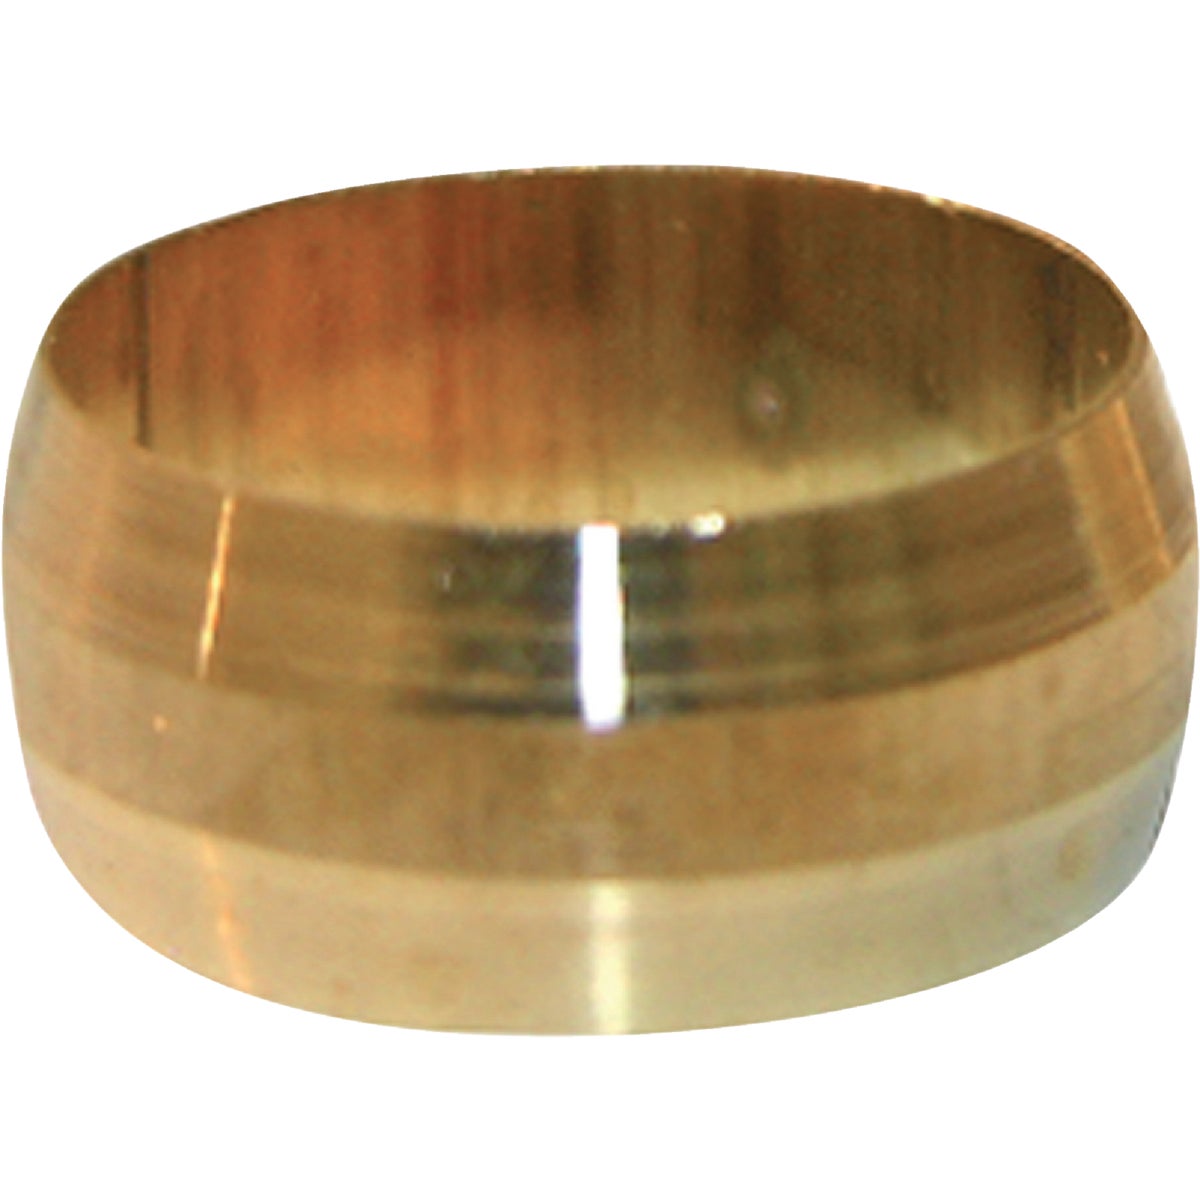 Lasco 1/2 In. Brass Compression Sleeve (2-Pack)